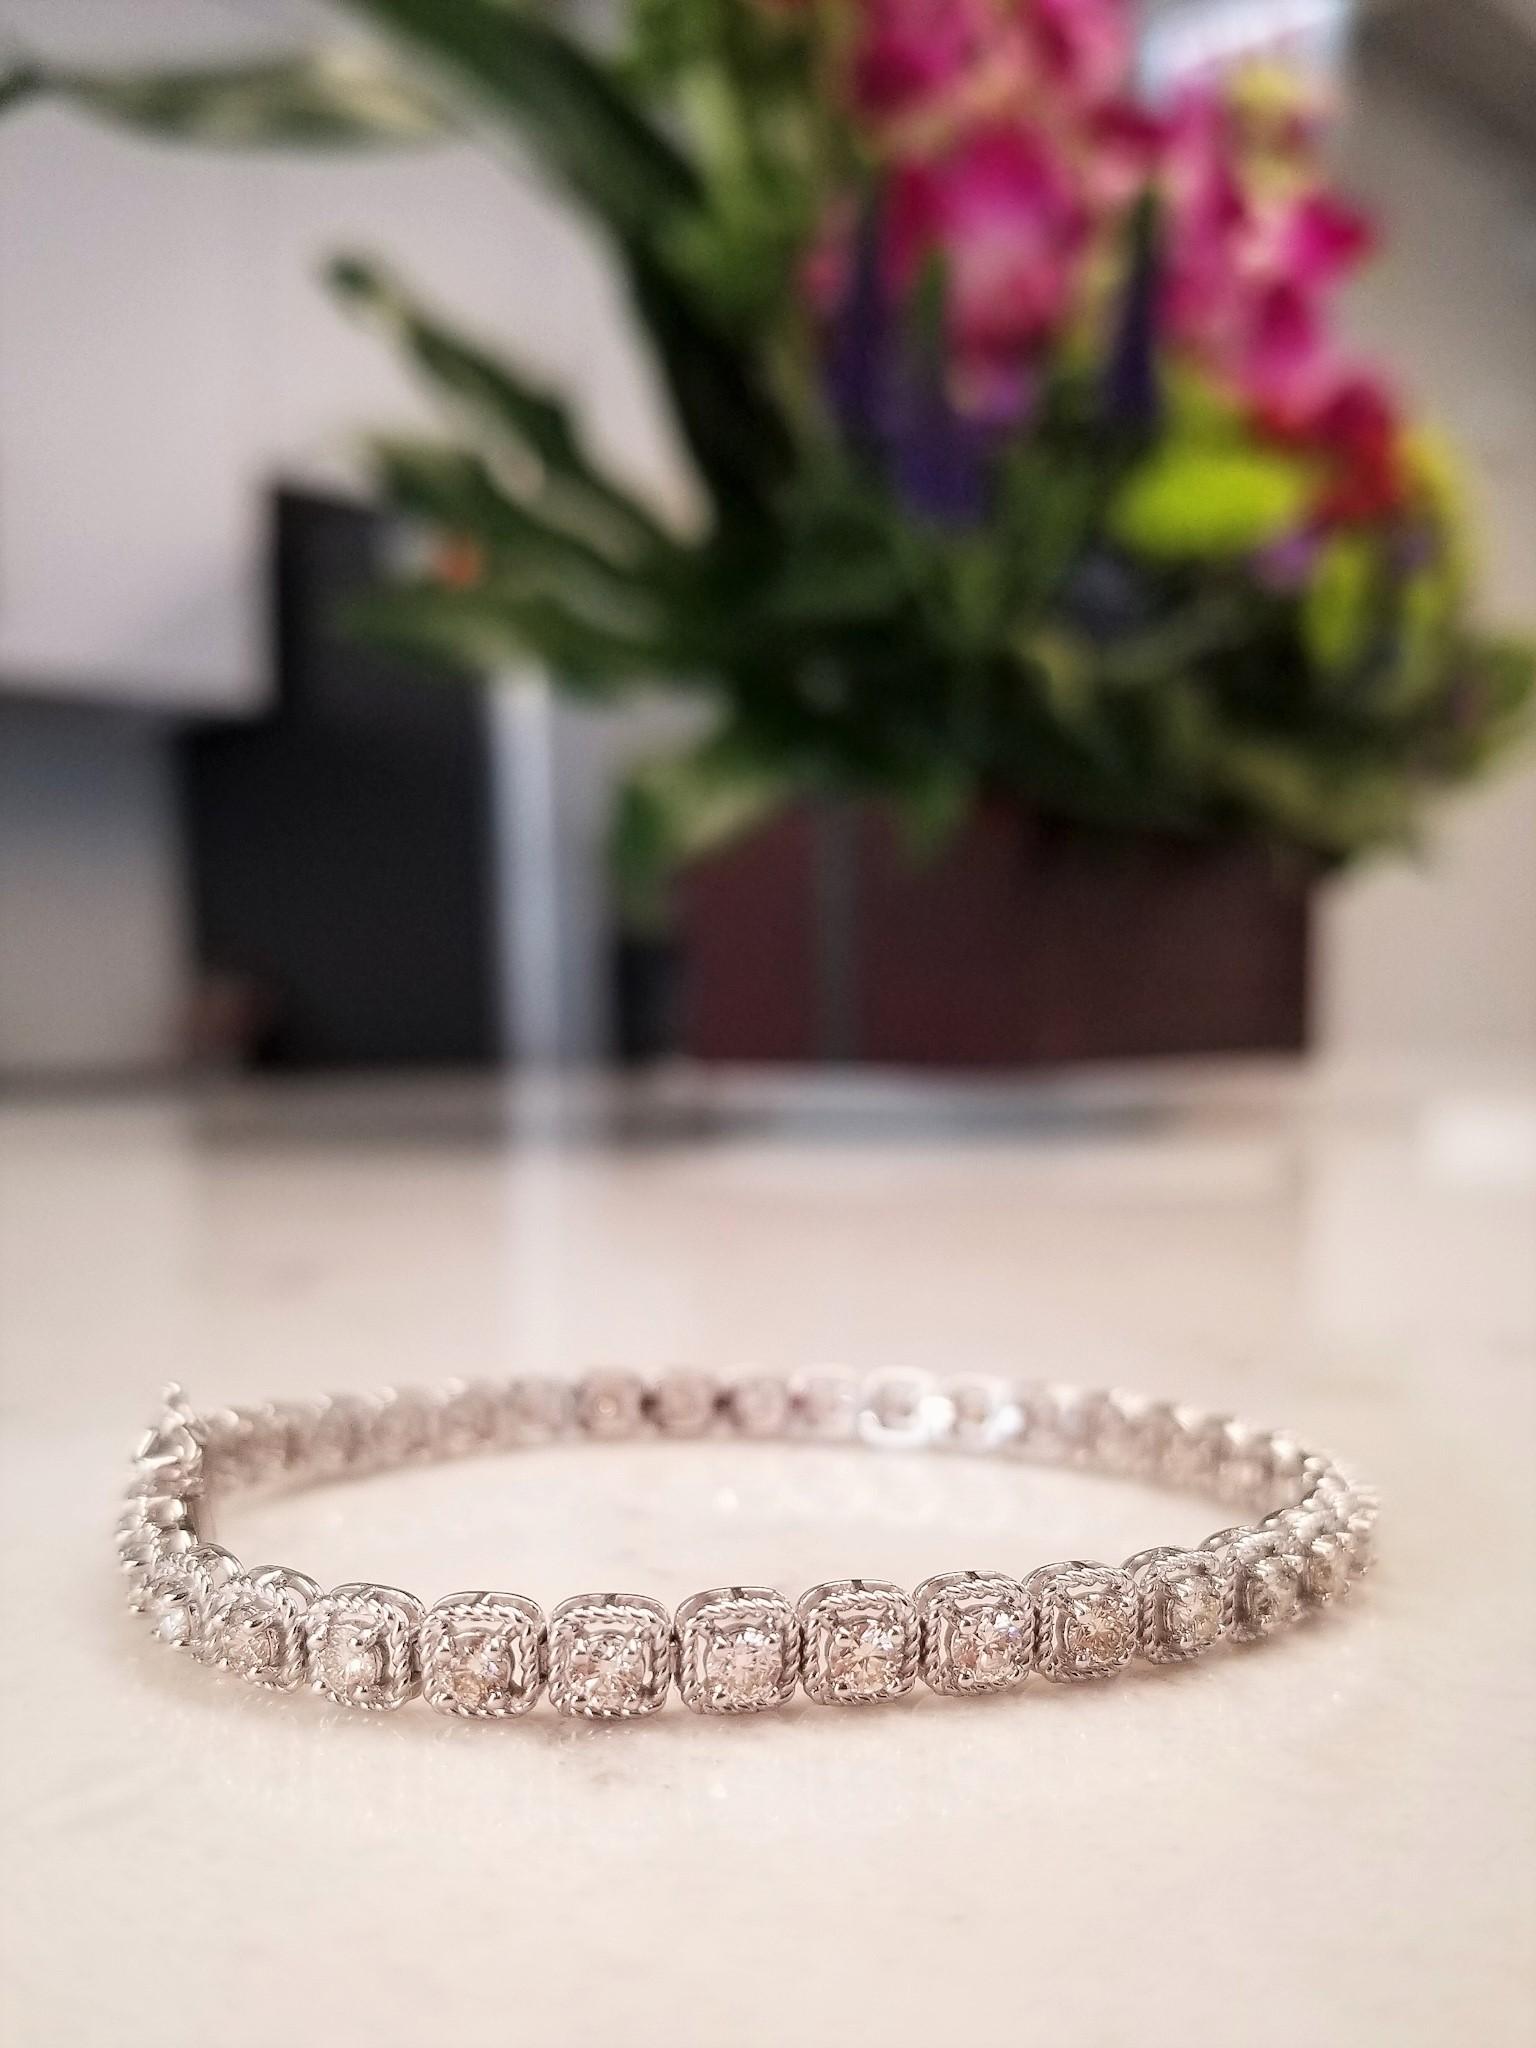 Twisted rope square-shaped links make this gorgeous tennis bracelet different. 37 round brilliant cut diamonds, prong set, and nestled in the center total 3.20 carats. Geometry meets timeless craftsmanship with this intriguing tennis bracelet